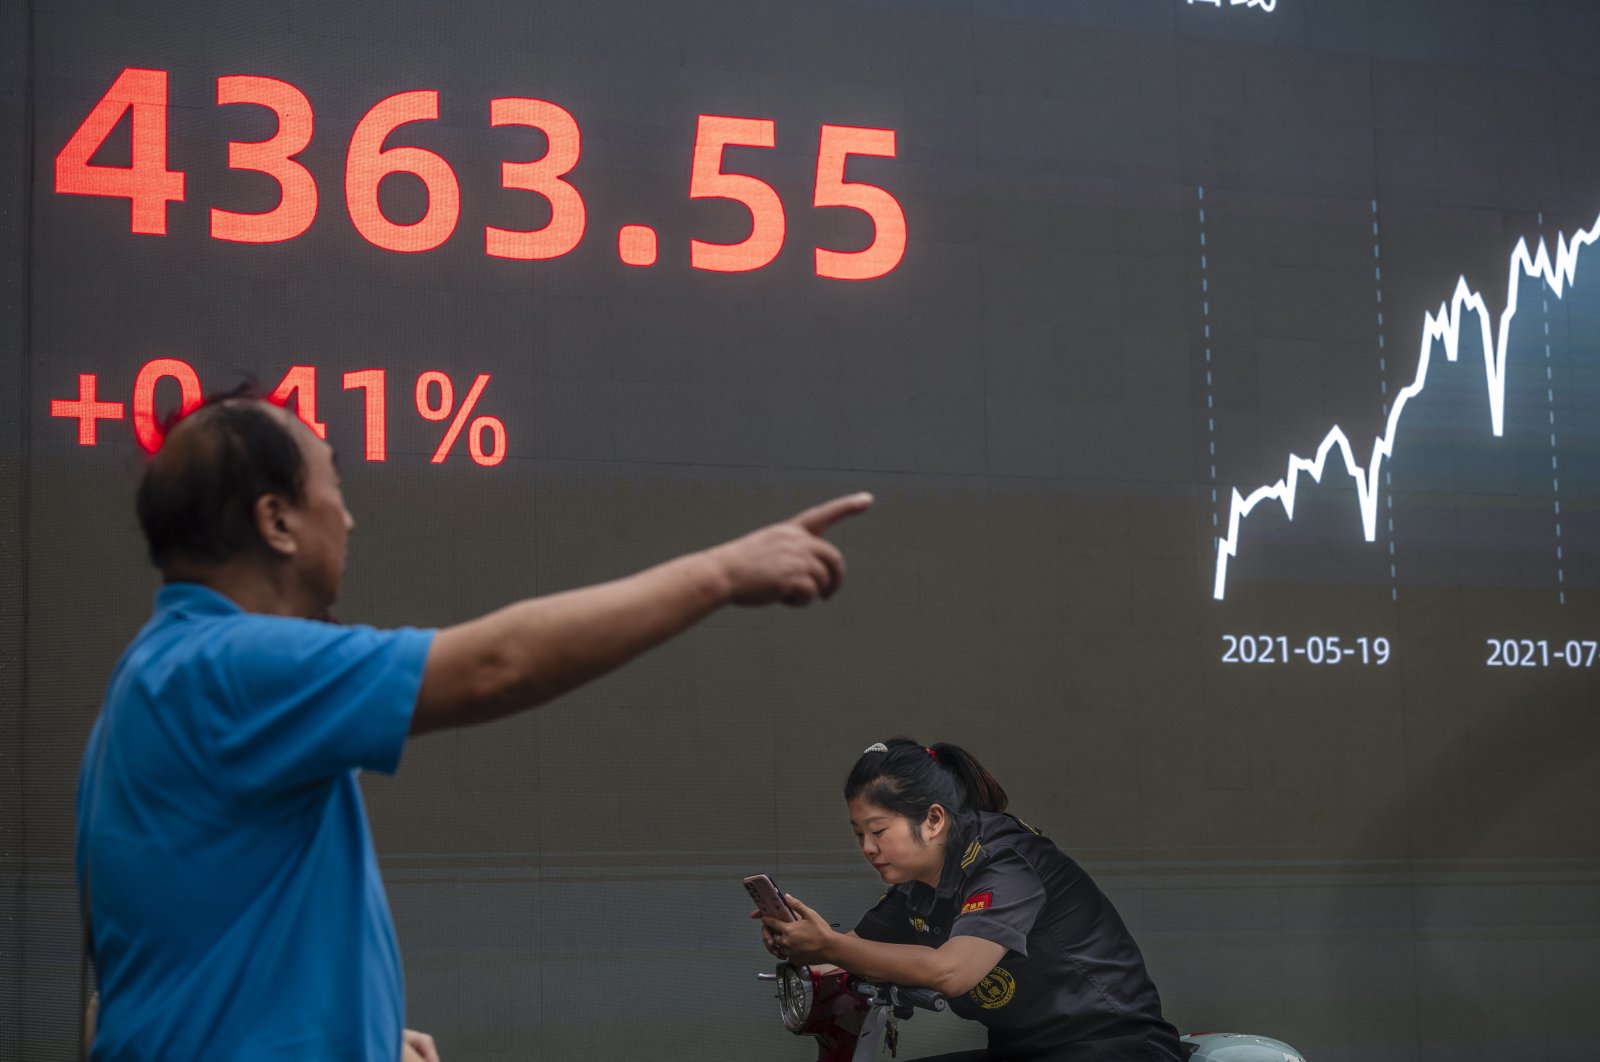 A man walks in front of the screen showing the newest stock exchange and economic data in Shanghai, China, Oct. 7, 2021. (EPA Photo)